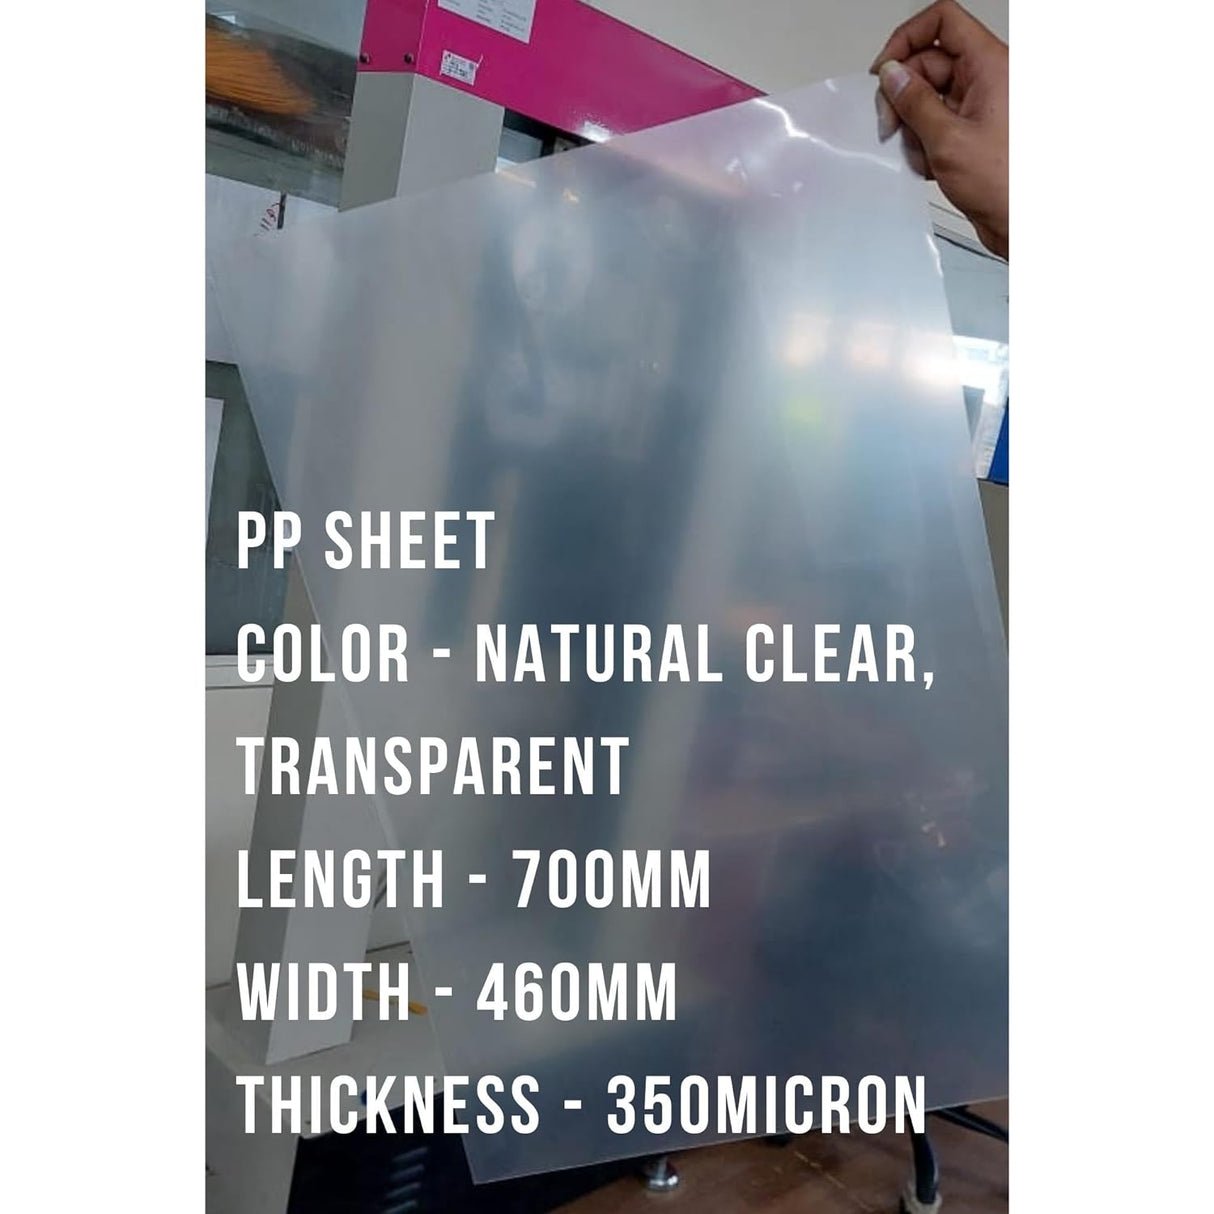 SINGHAL 27x18 Inch Clear PP Plain Transparent Sheet 350 Micron Pack of 200 with one side masking film for surface protection of the sheet